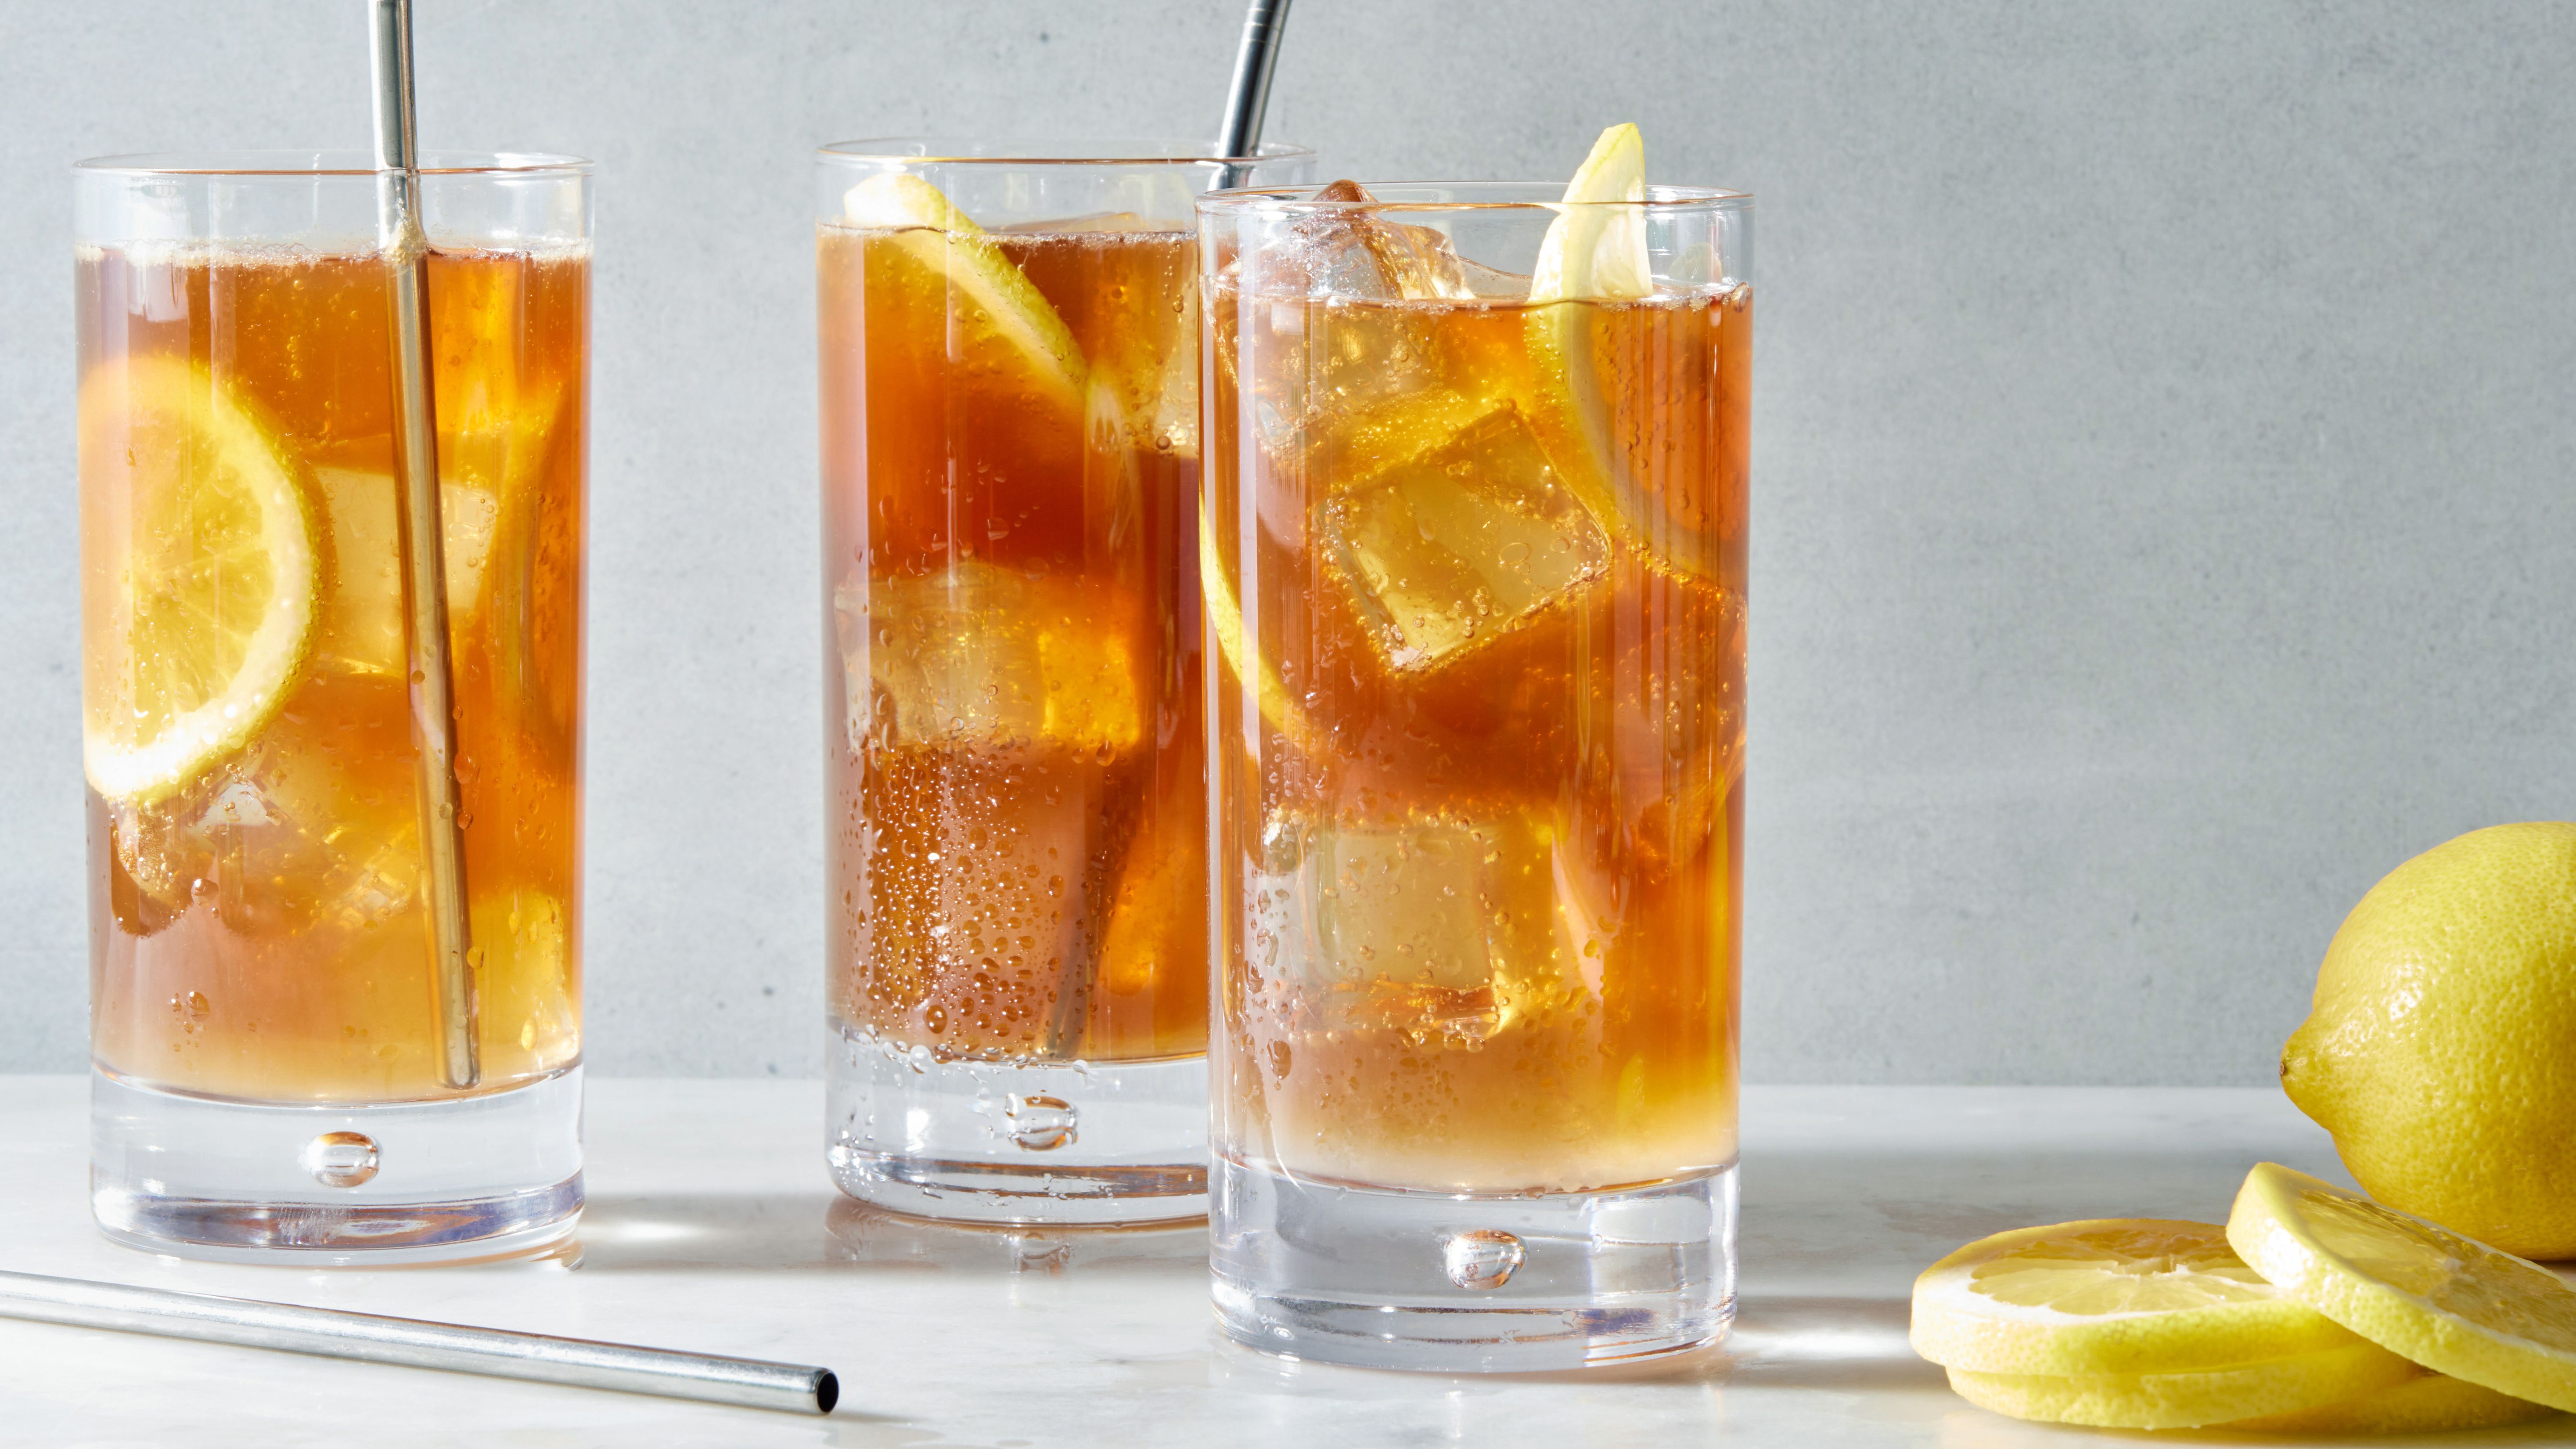 How to Use our WK Iced Tea Maker 